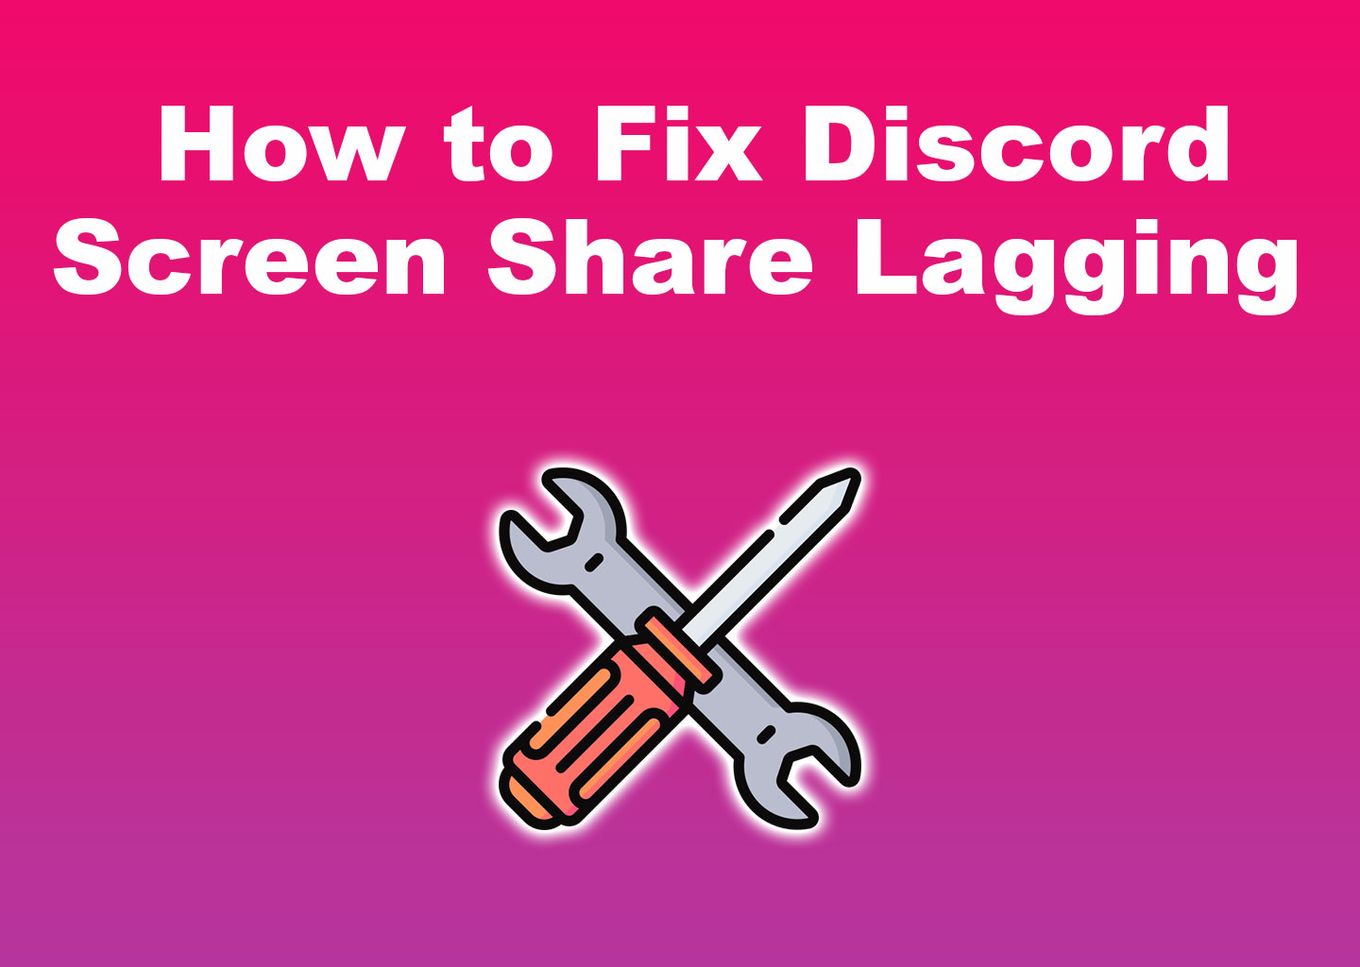 How to Fix Discord Screen Share Lagging